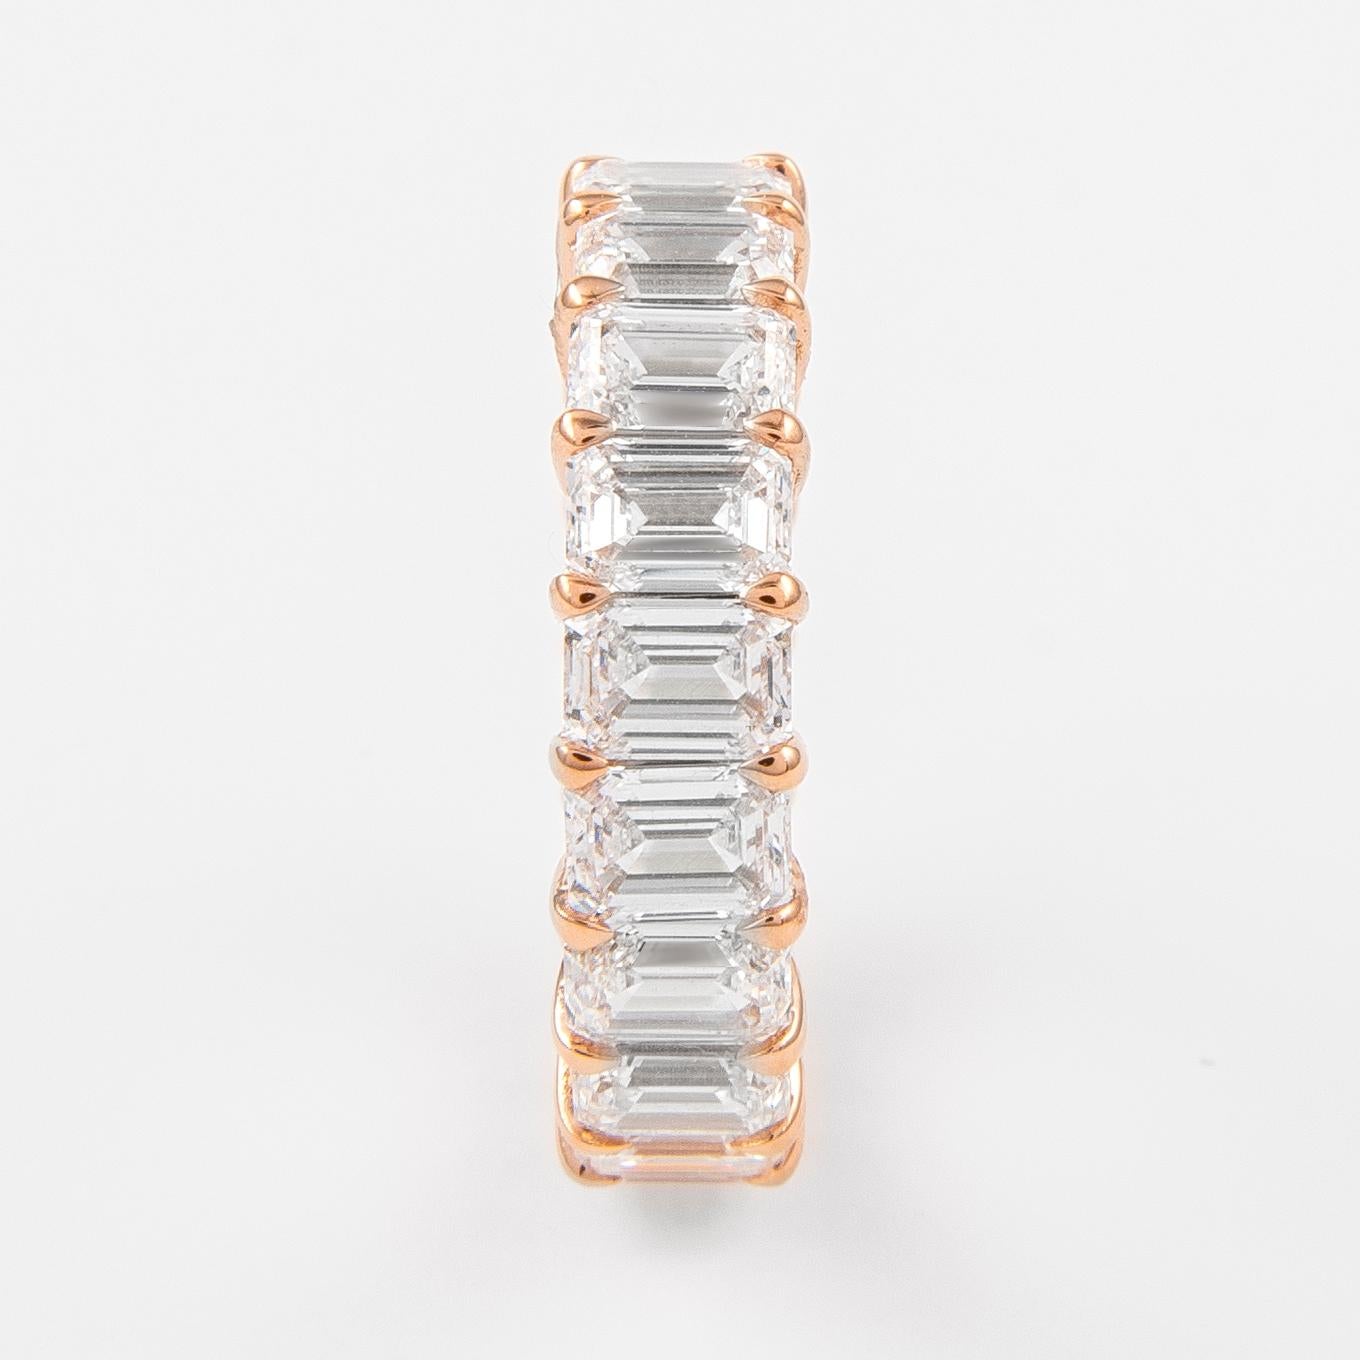 Stunning emerald cut diamond eternity band, by Alexander Beverly Hills.
15 emerald cut diamonds, 8.08 carats total. I/J color and VS clarity. Set in 18k rose gold, 4.39 grams, size 6.5. 
Accommodated with an up to date appraisal by a GIA G.G. upon